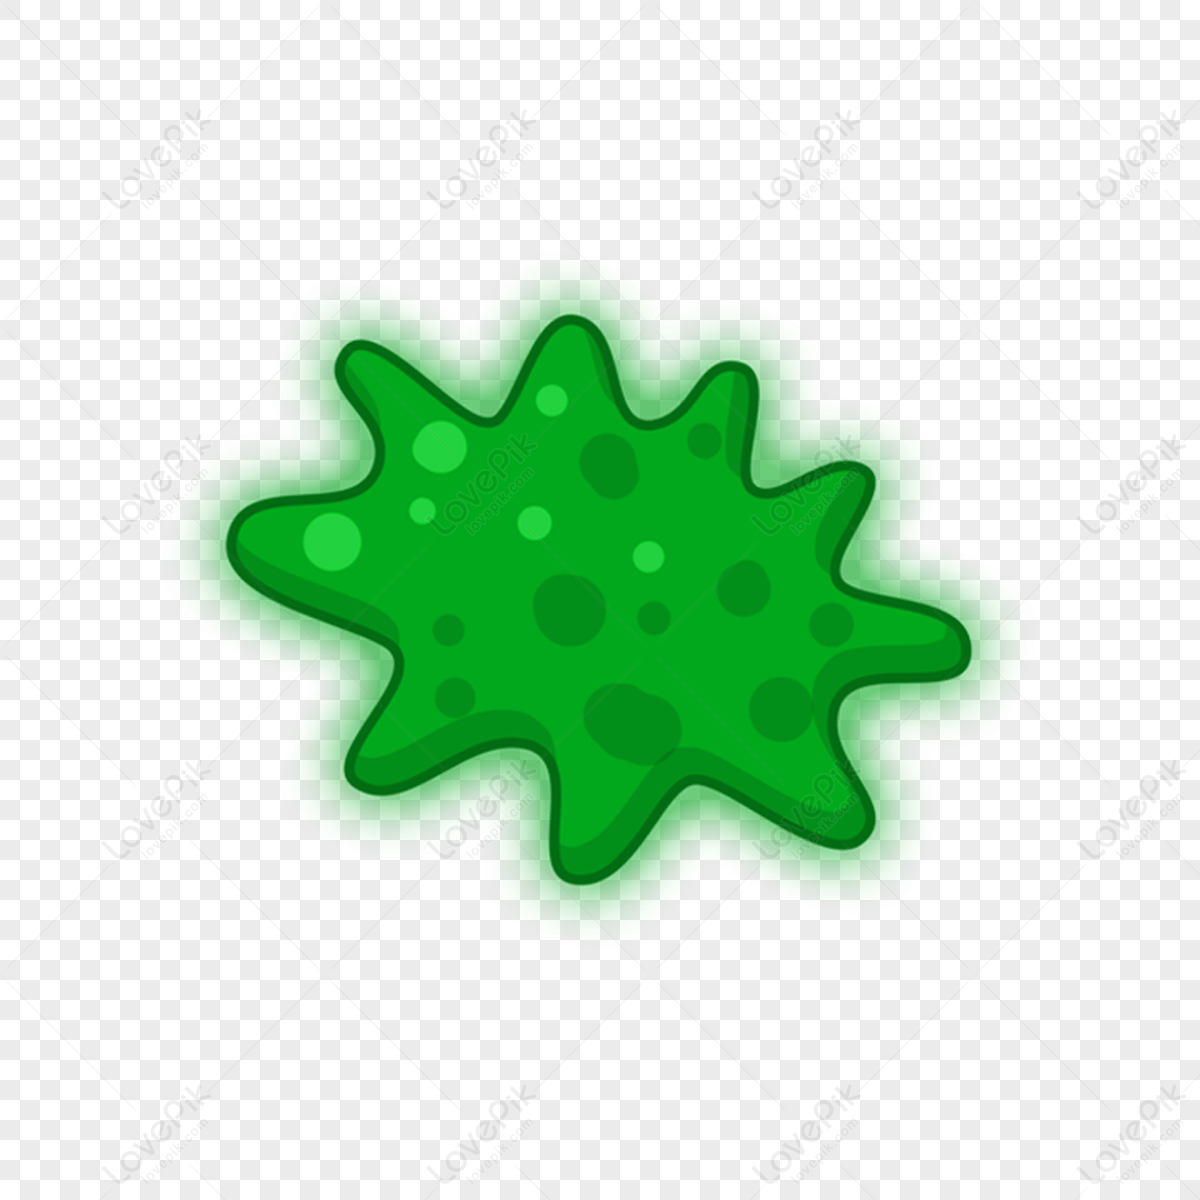 Slime PNG Images With Transparent Background